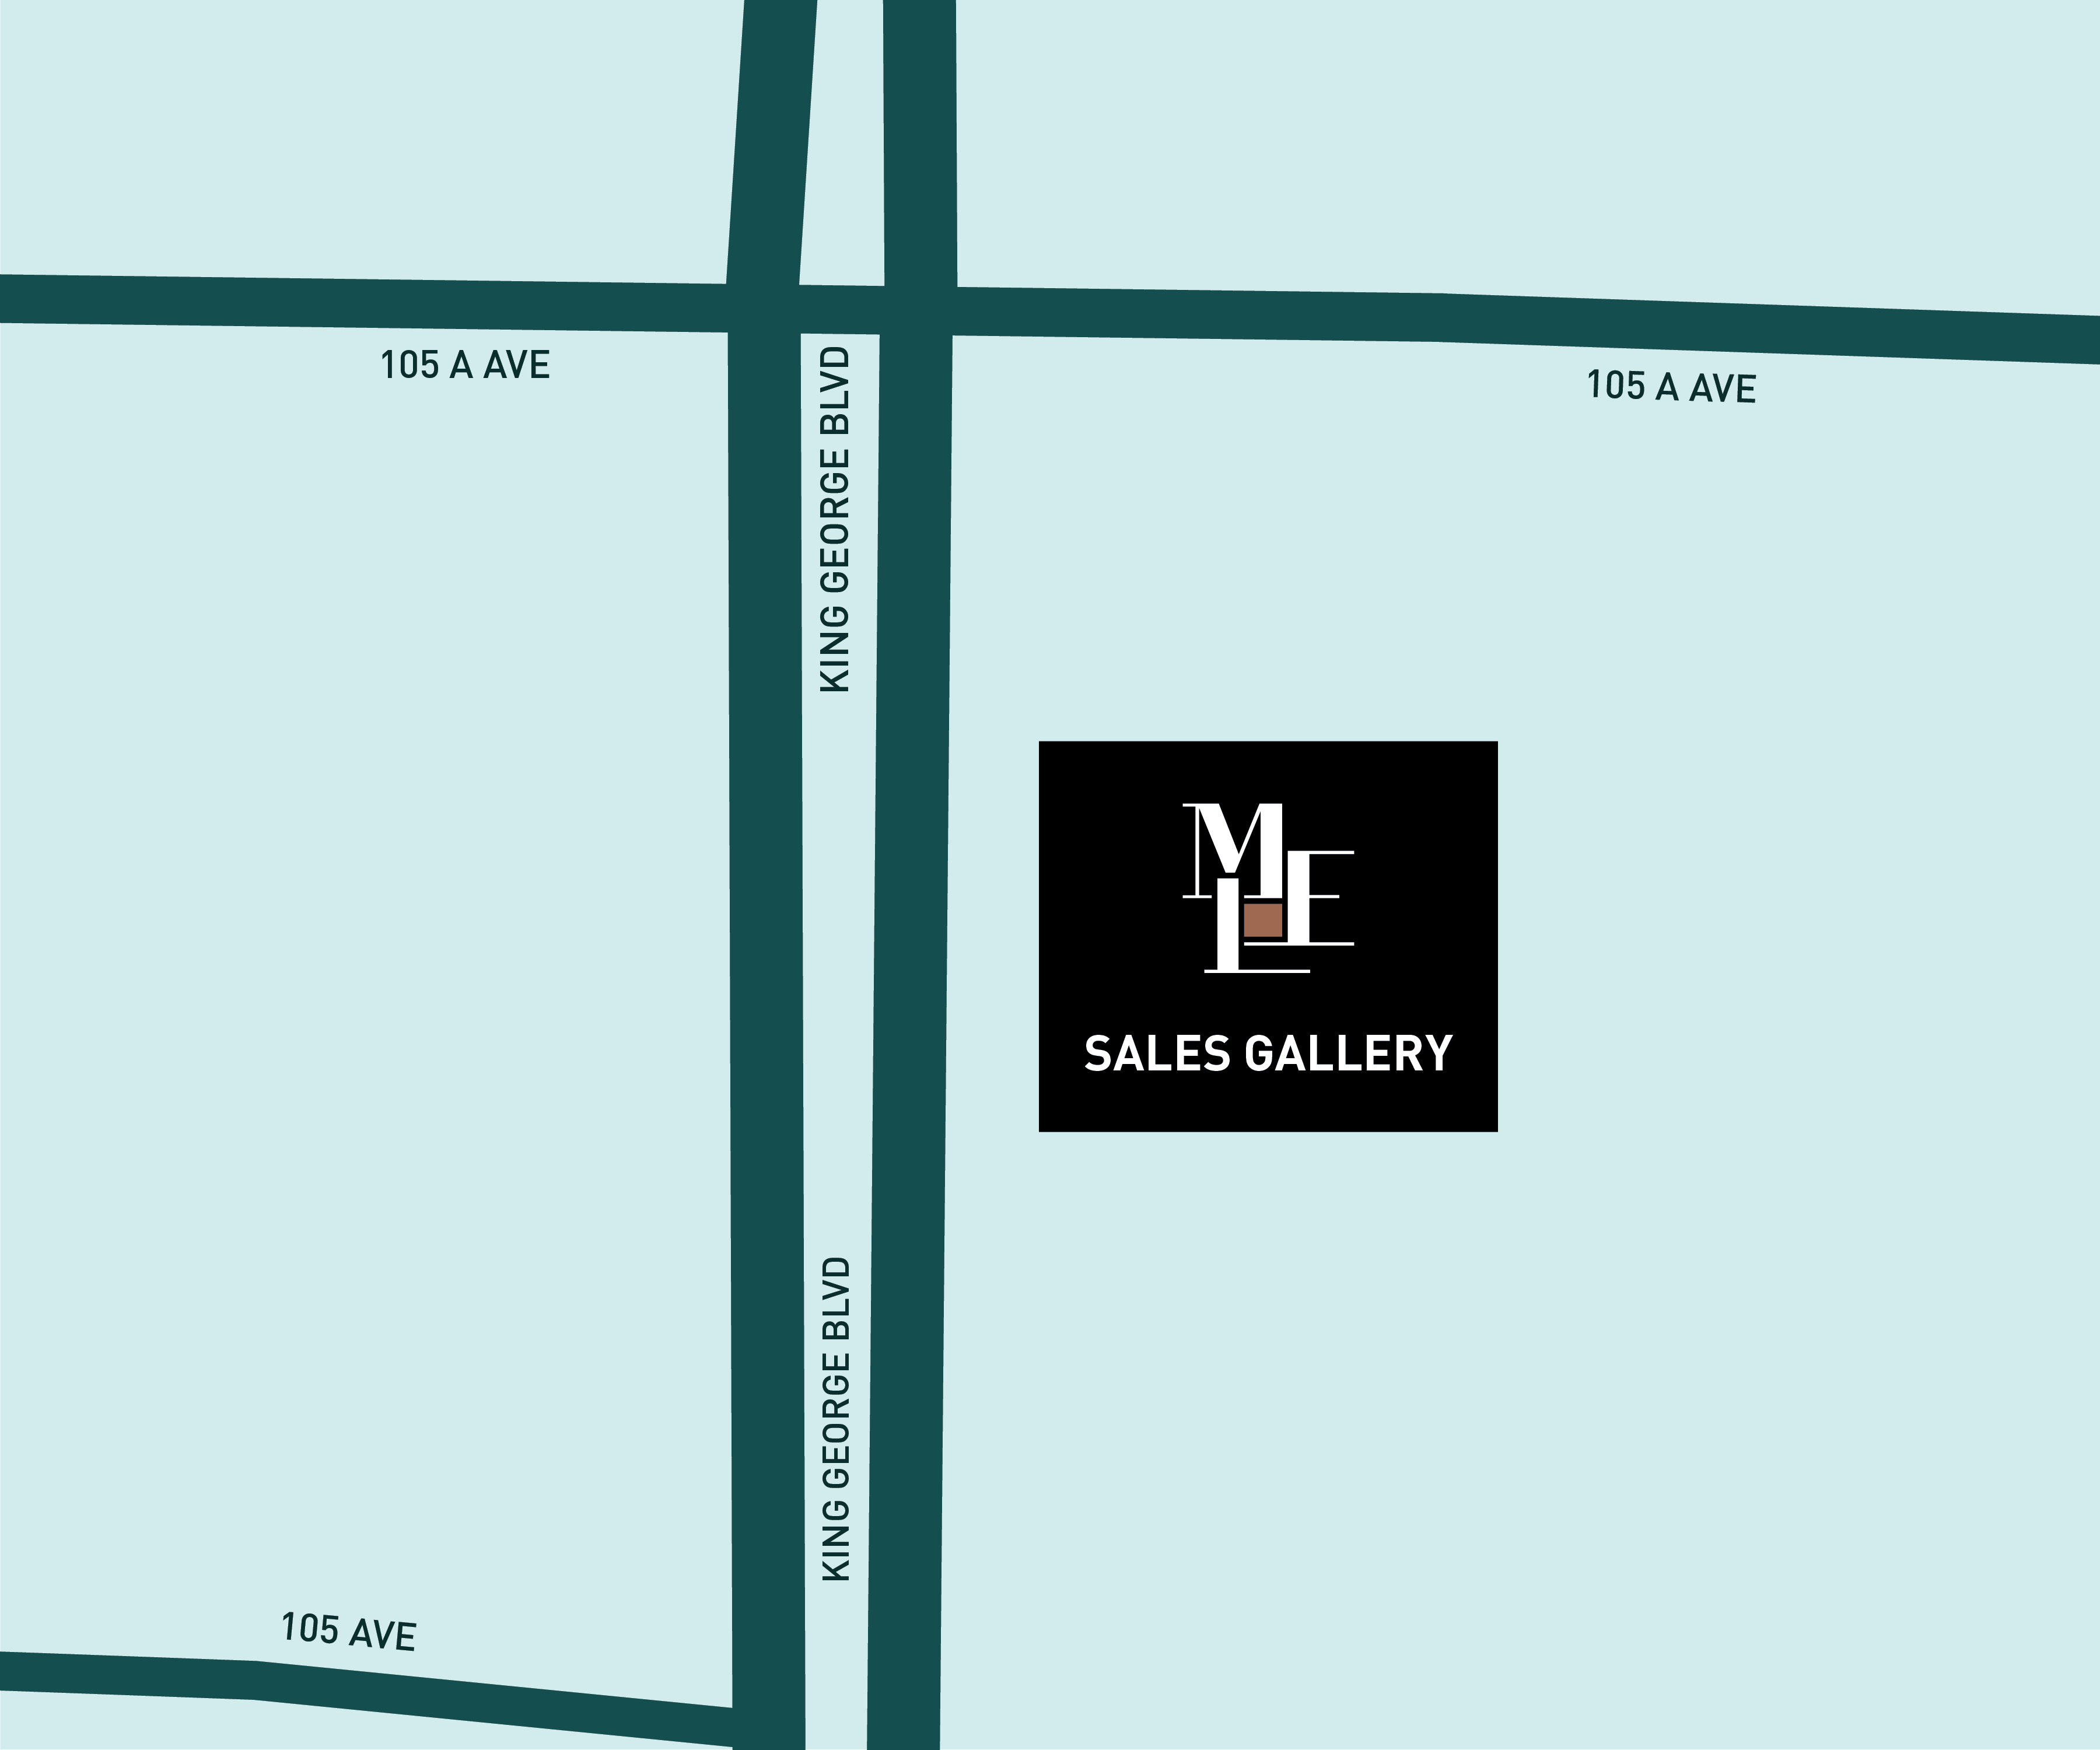 Map showing MLE Sales Gallery presentation centre location